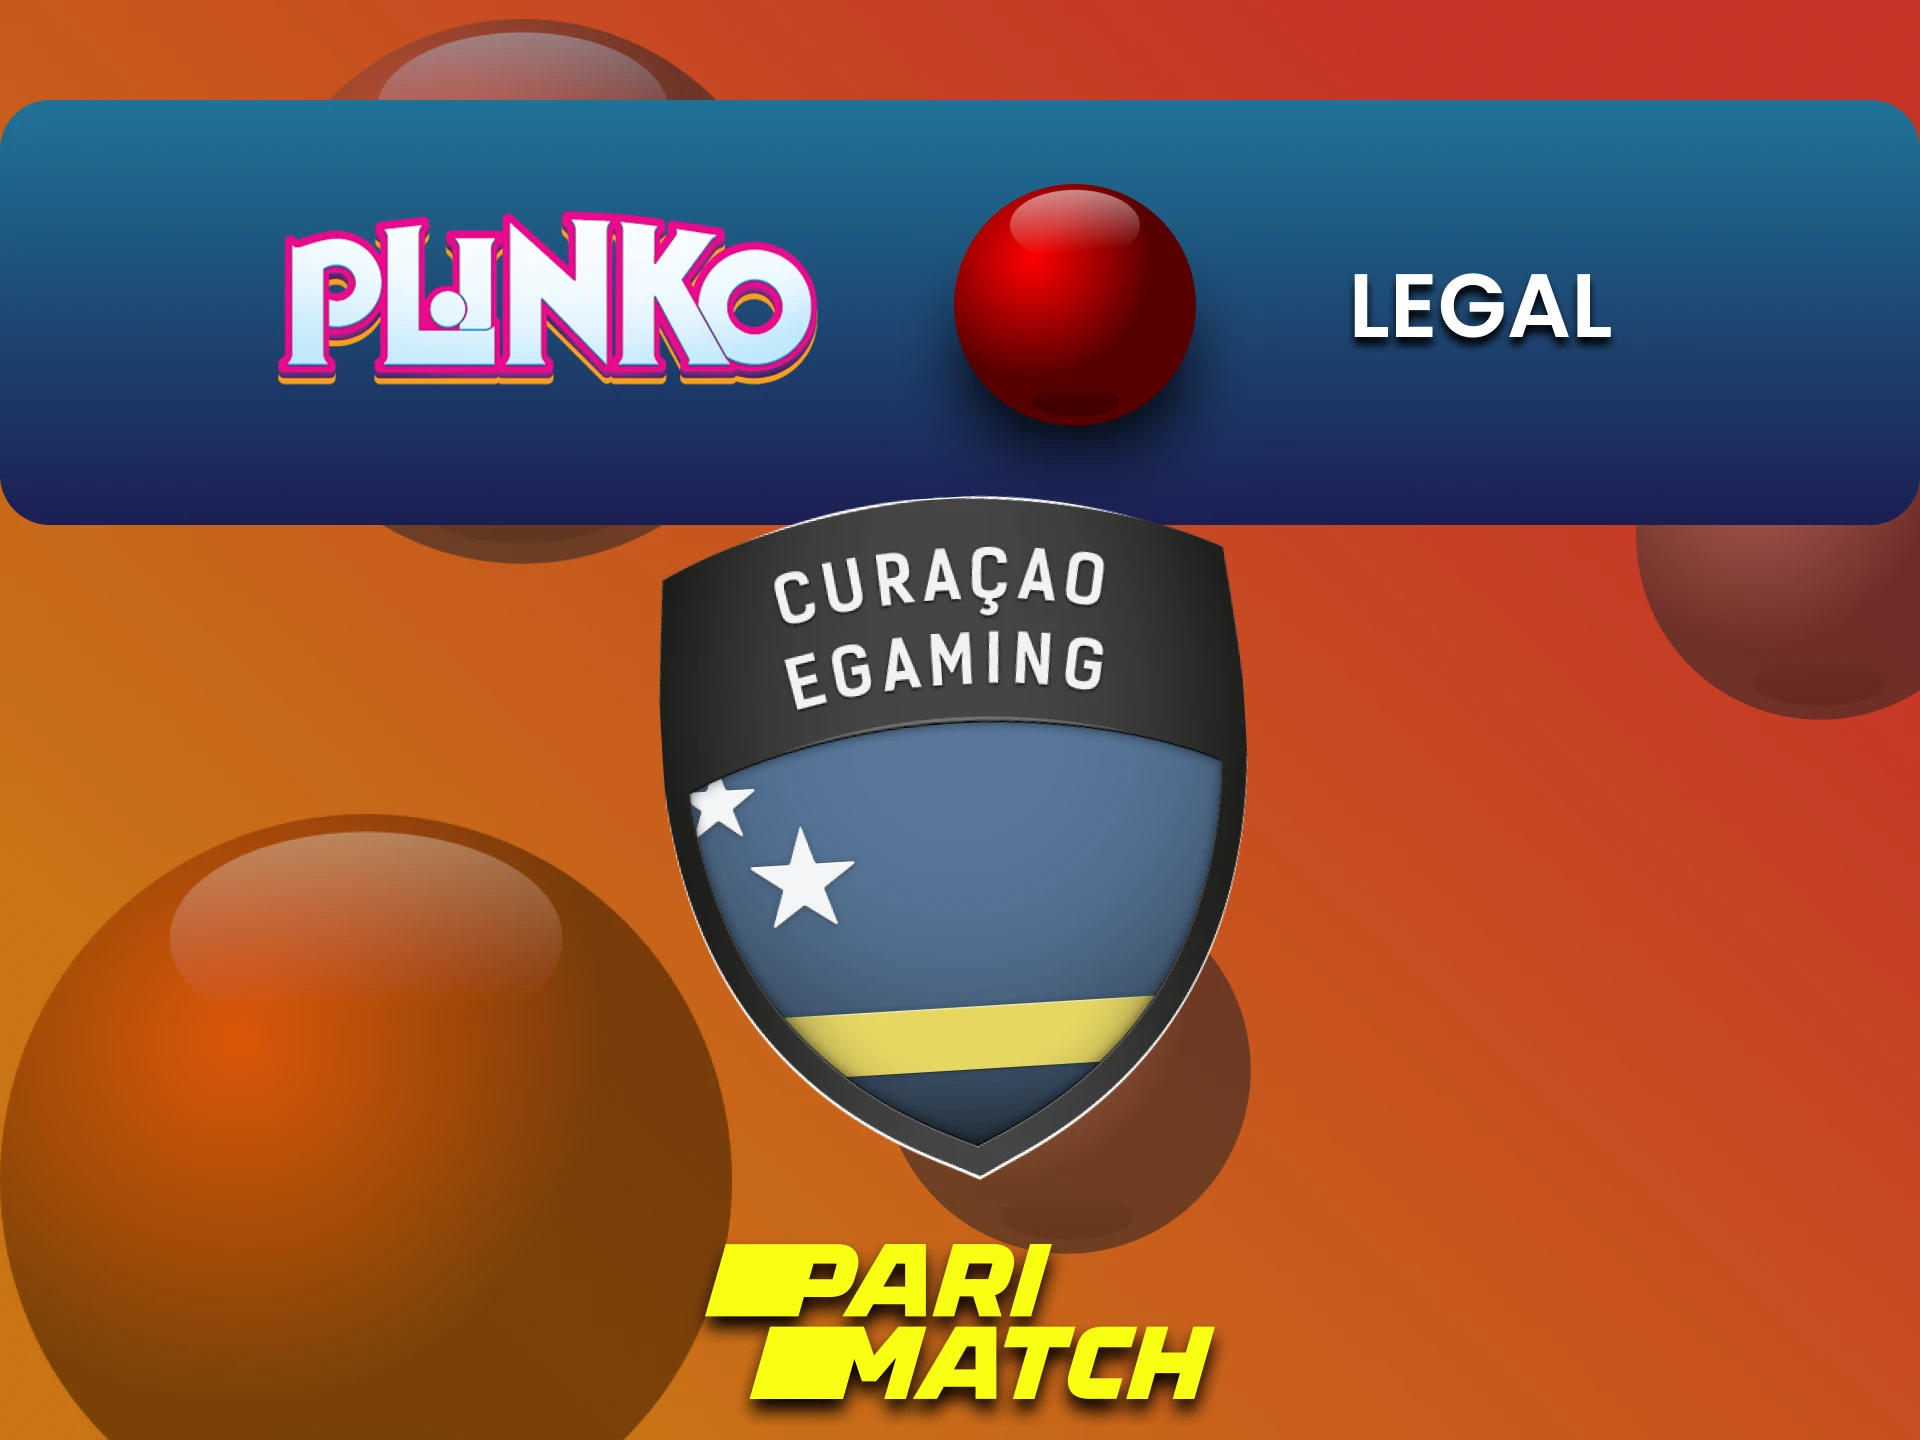 Parimatch is legal in India for playing Plinko.